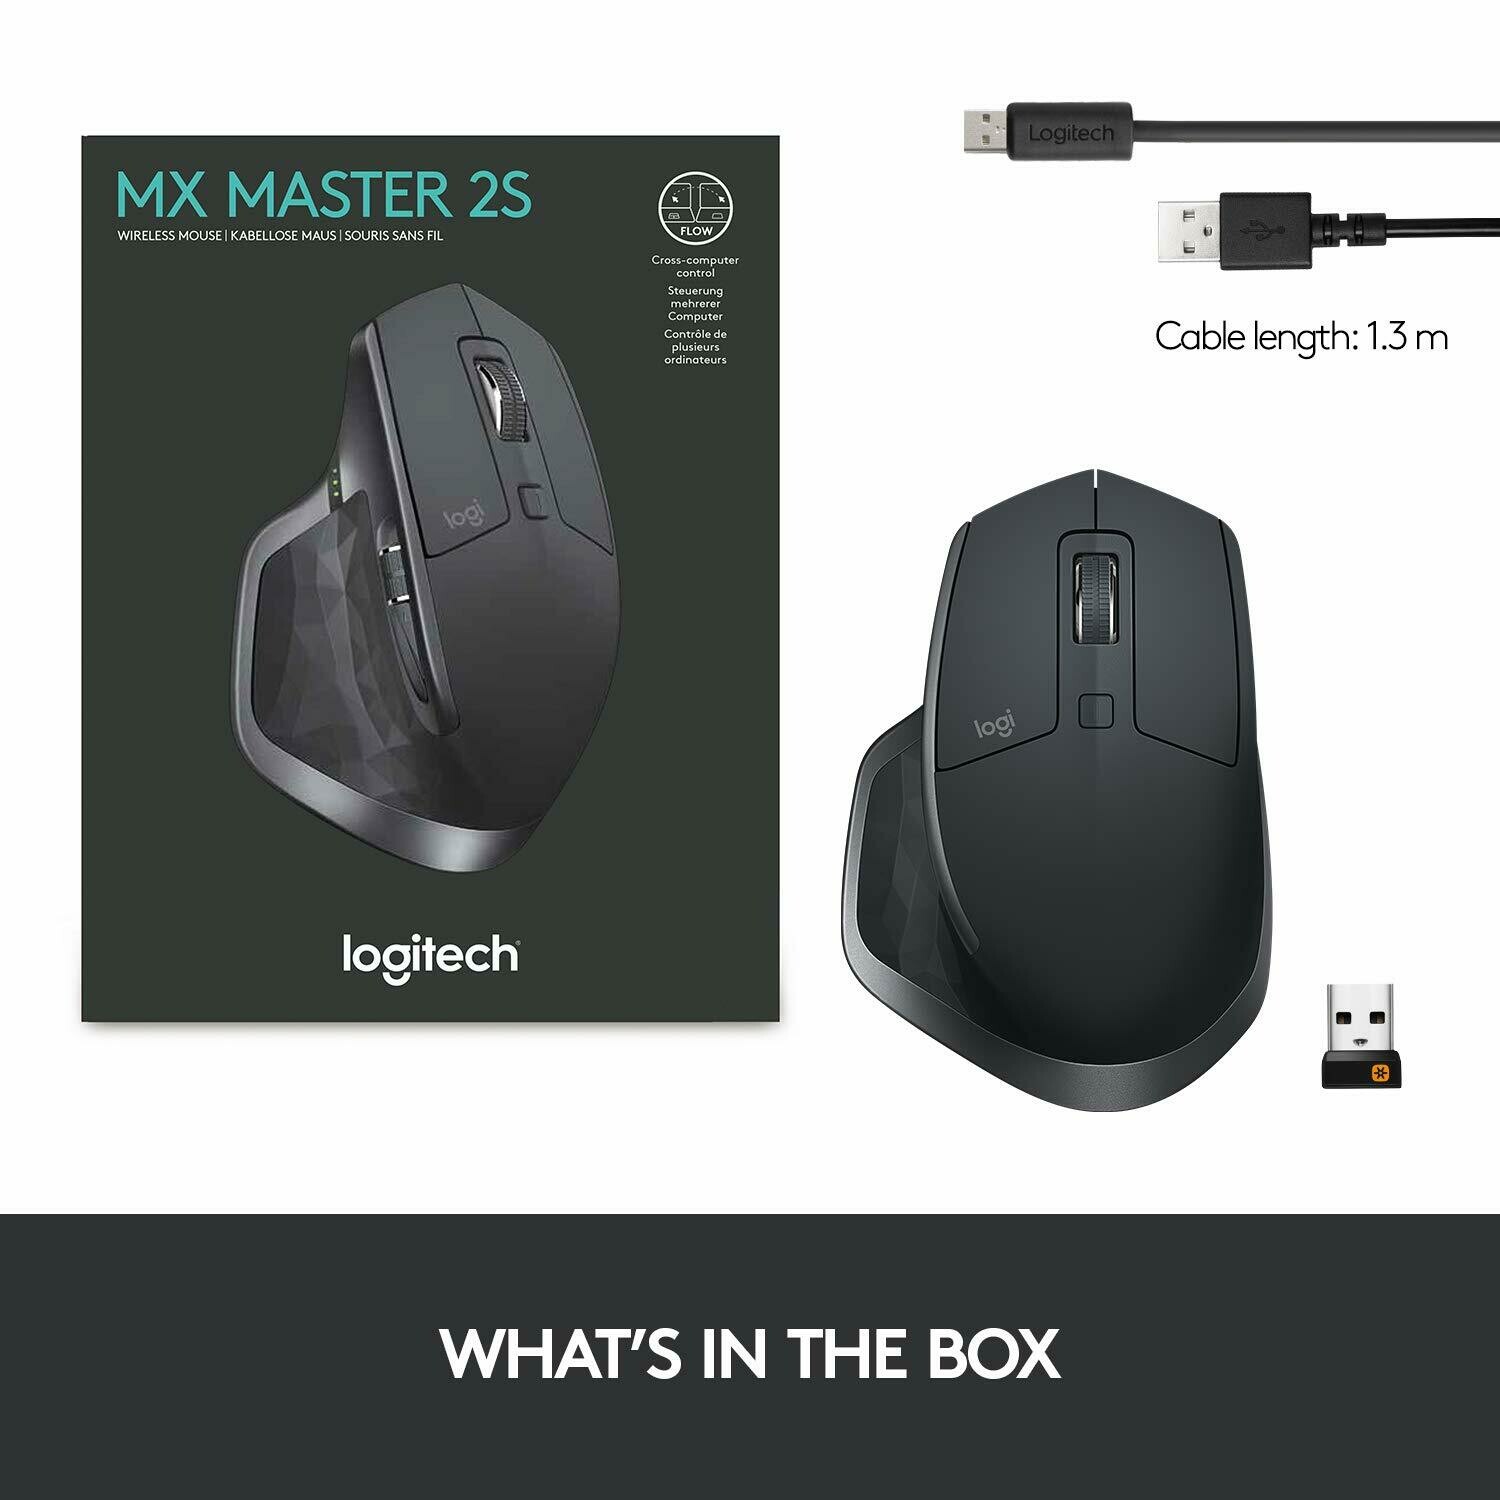 Rs.5664 - Logitech MX Master 2S Wireless Mouse